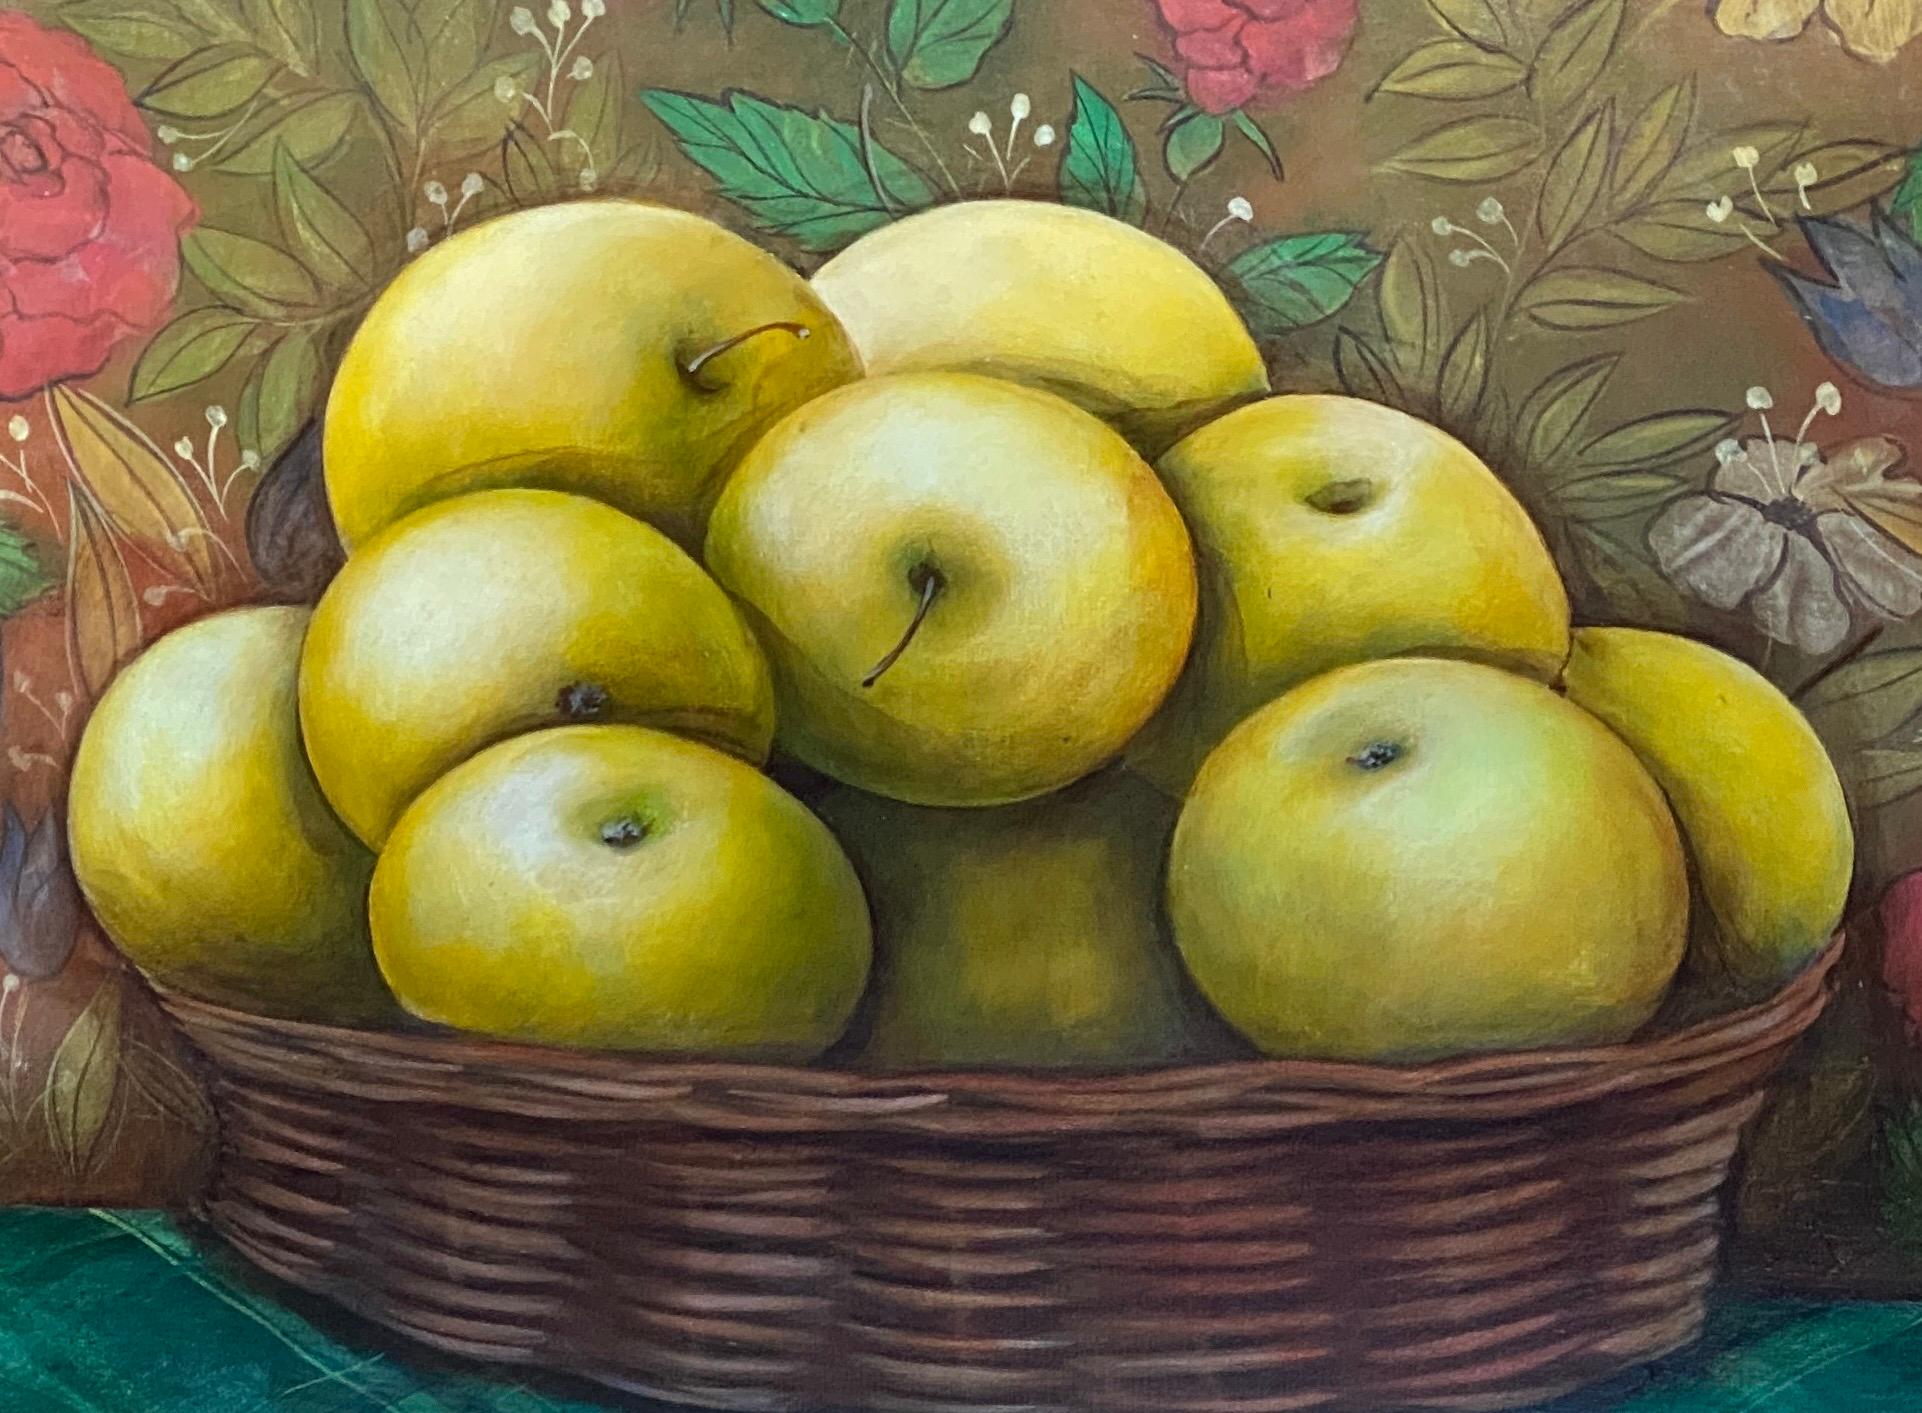 The still Life with yellow apples.  im Angebot 1